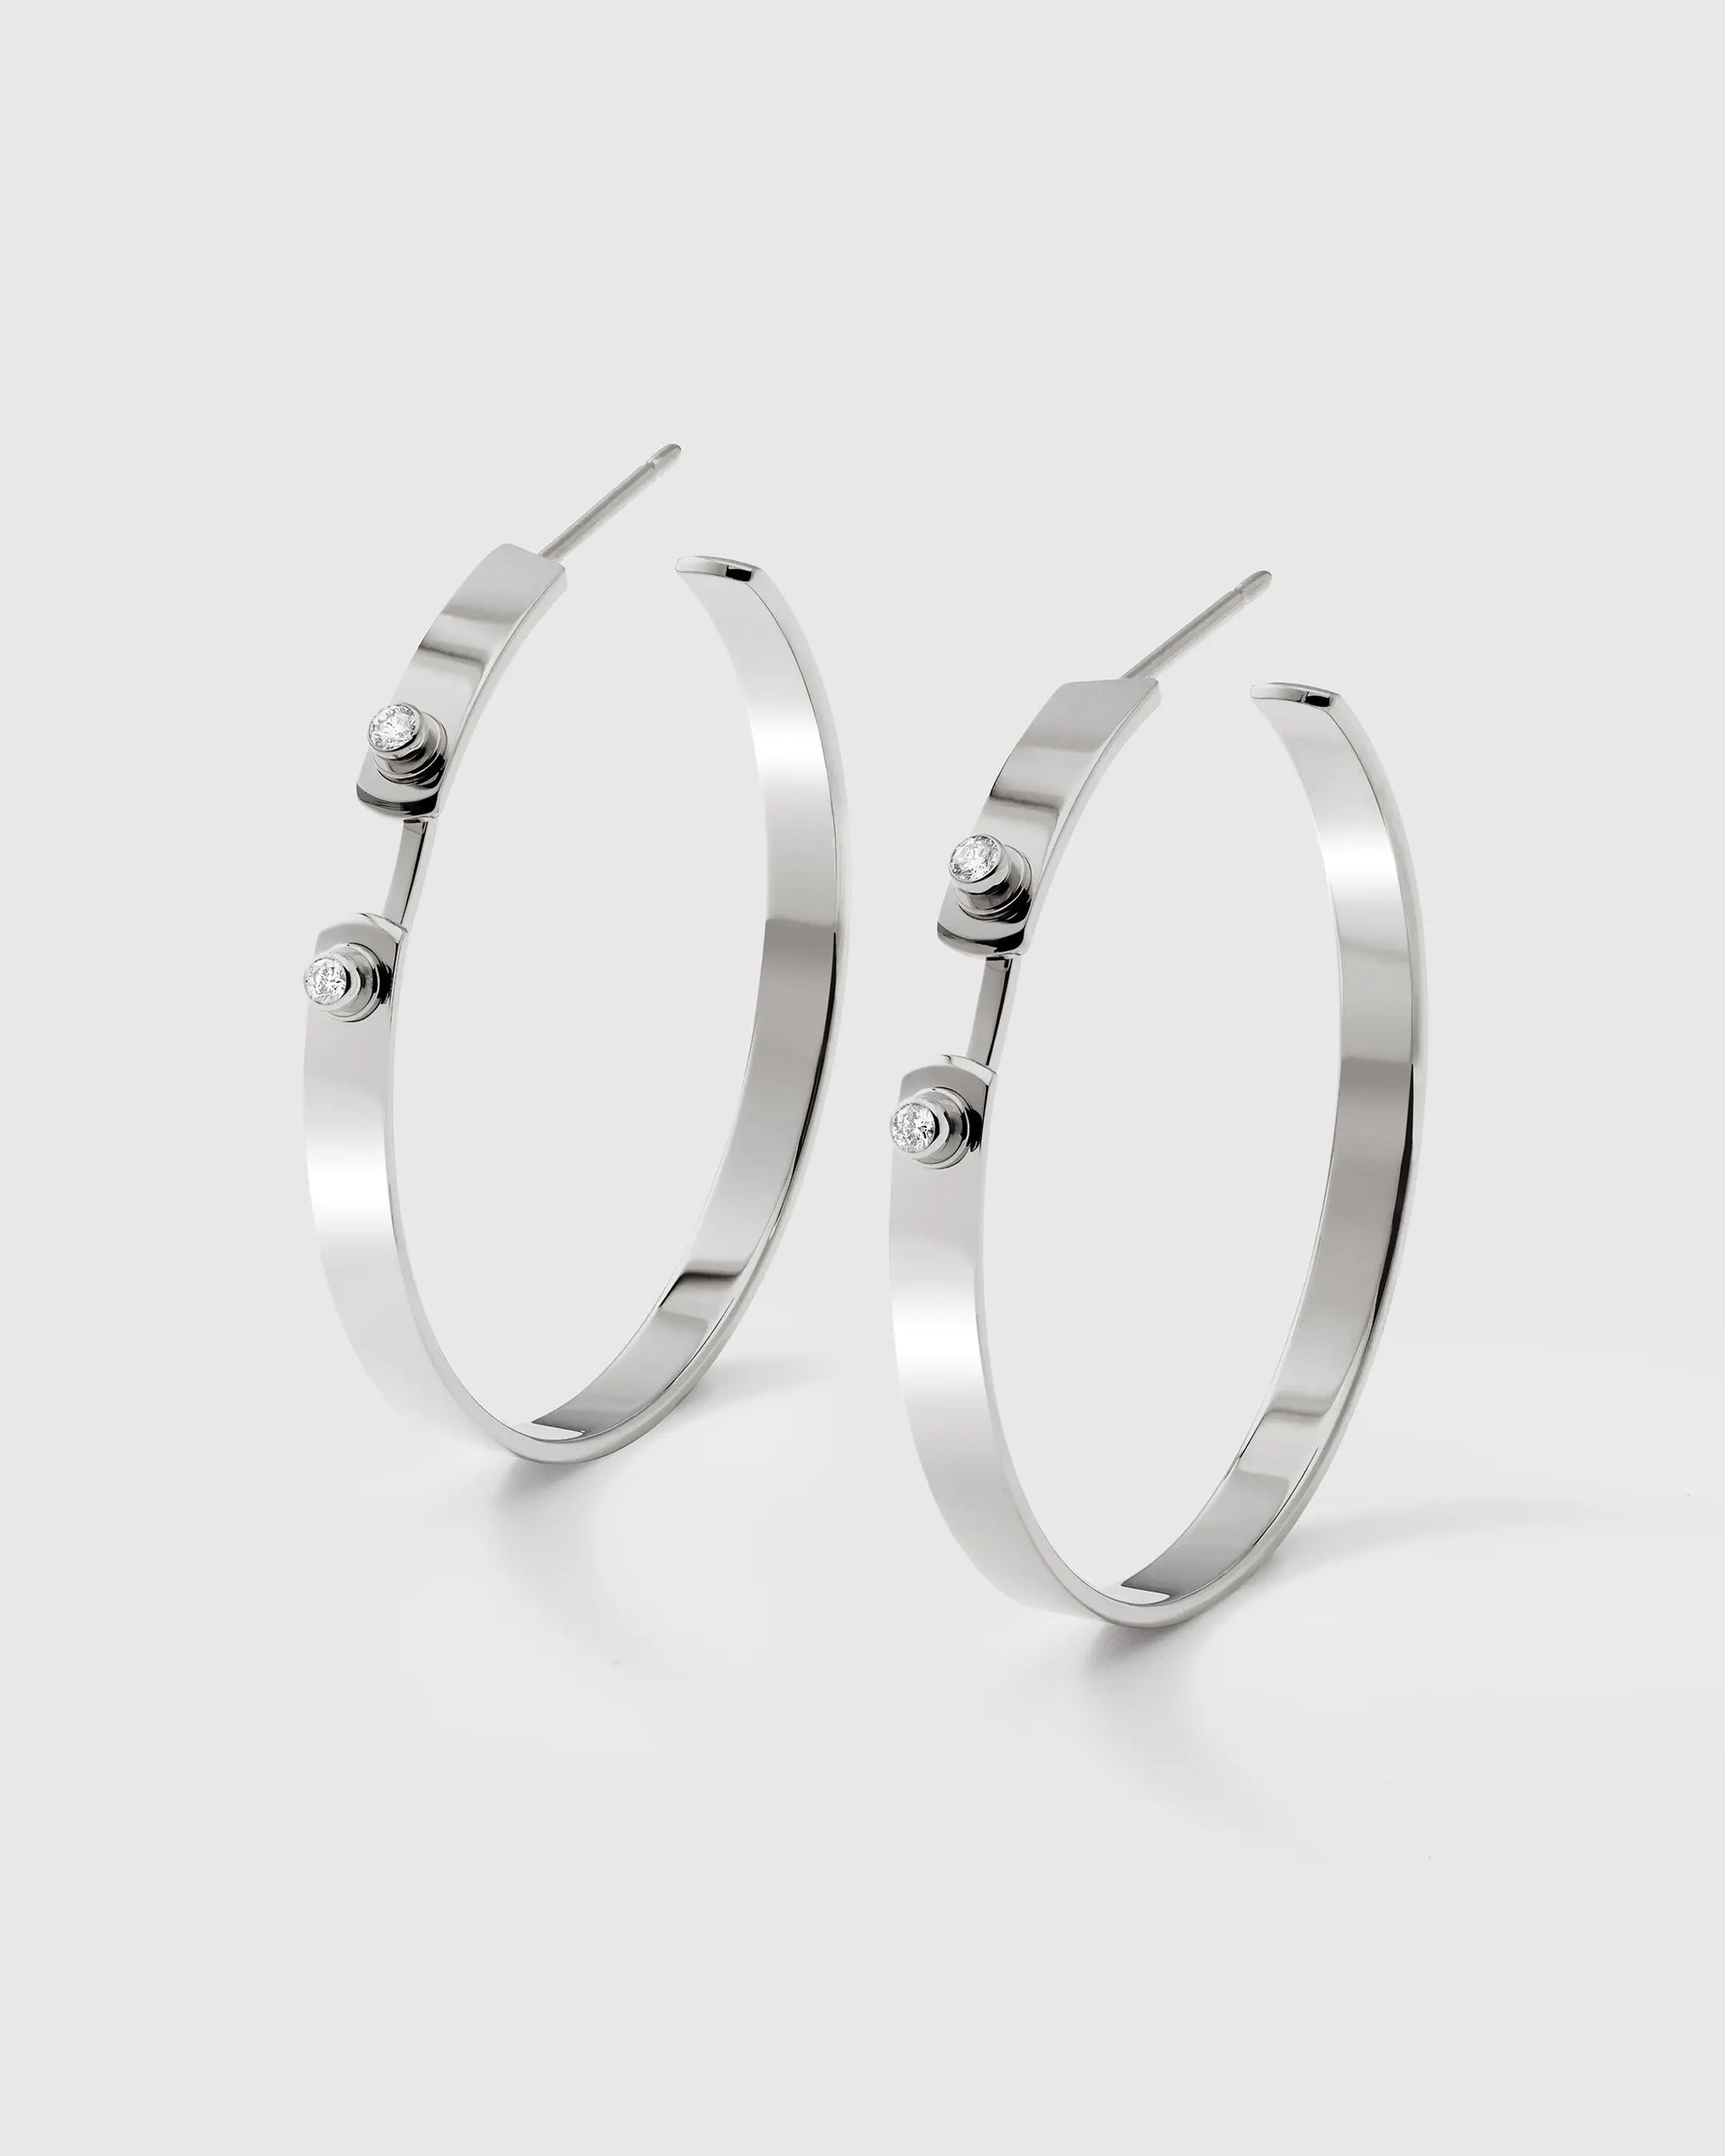 Monday Morning Mood Hoops in White Gold - 1 - Nouvel Heritage